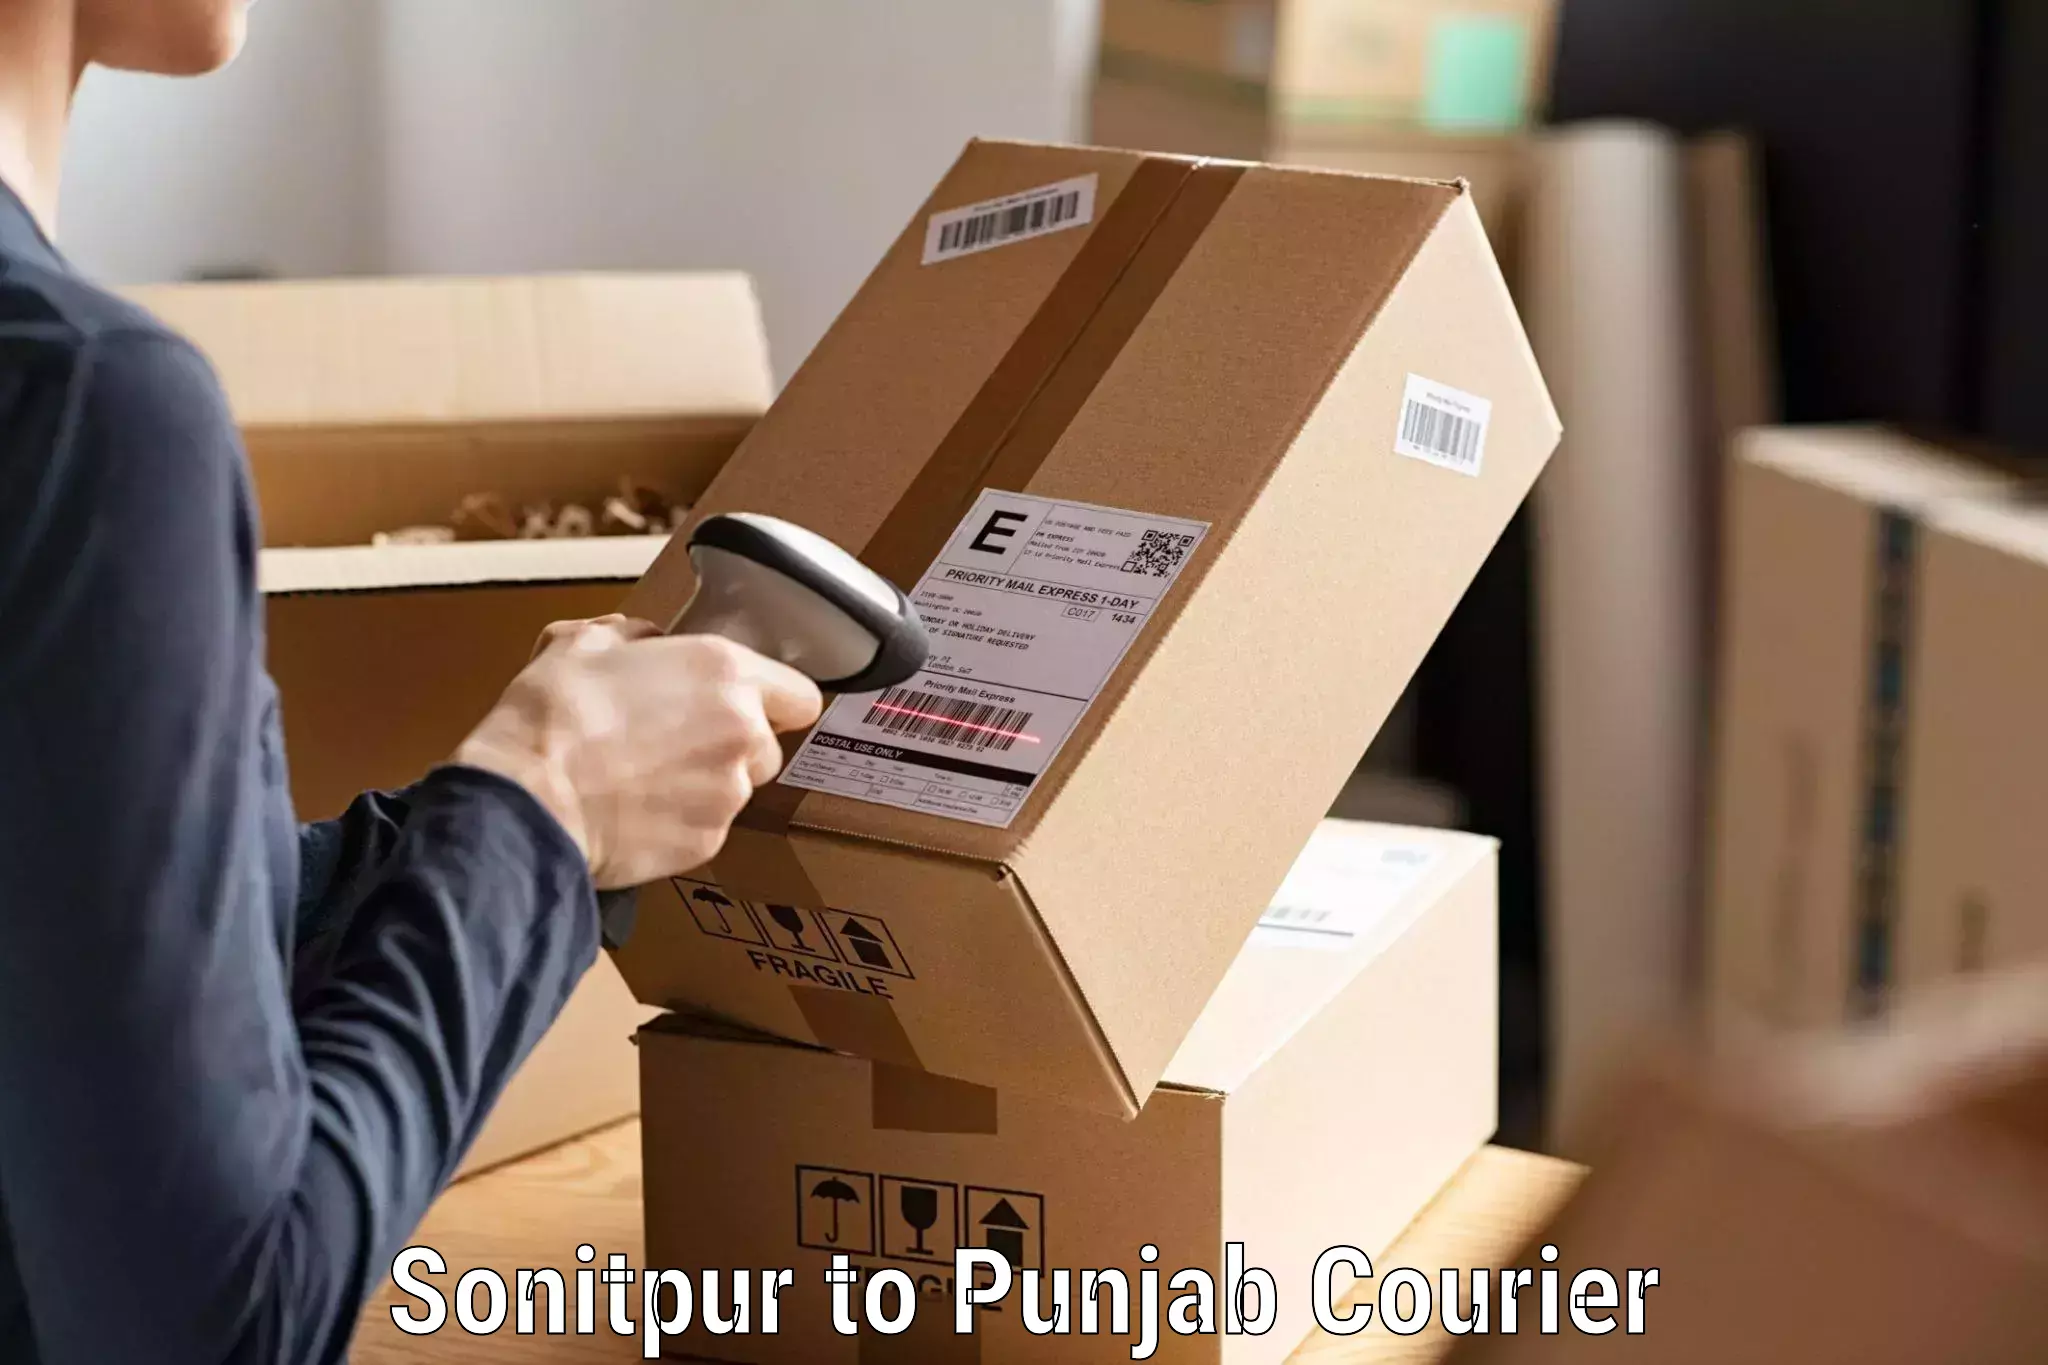 Efficient courier operations Sonitpur to Nabha